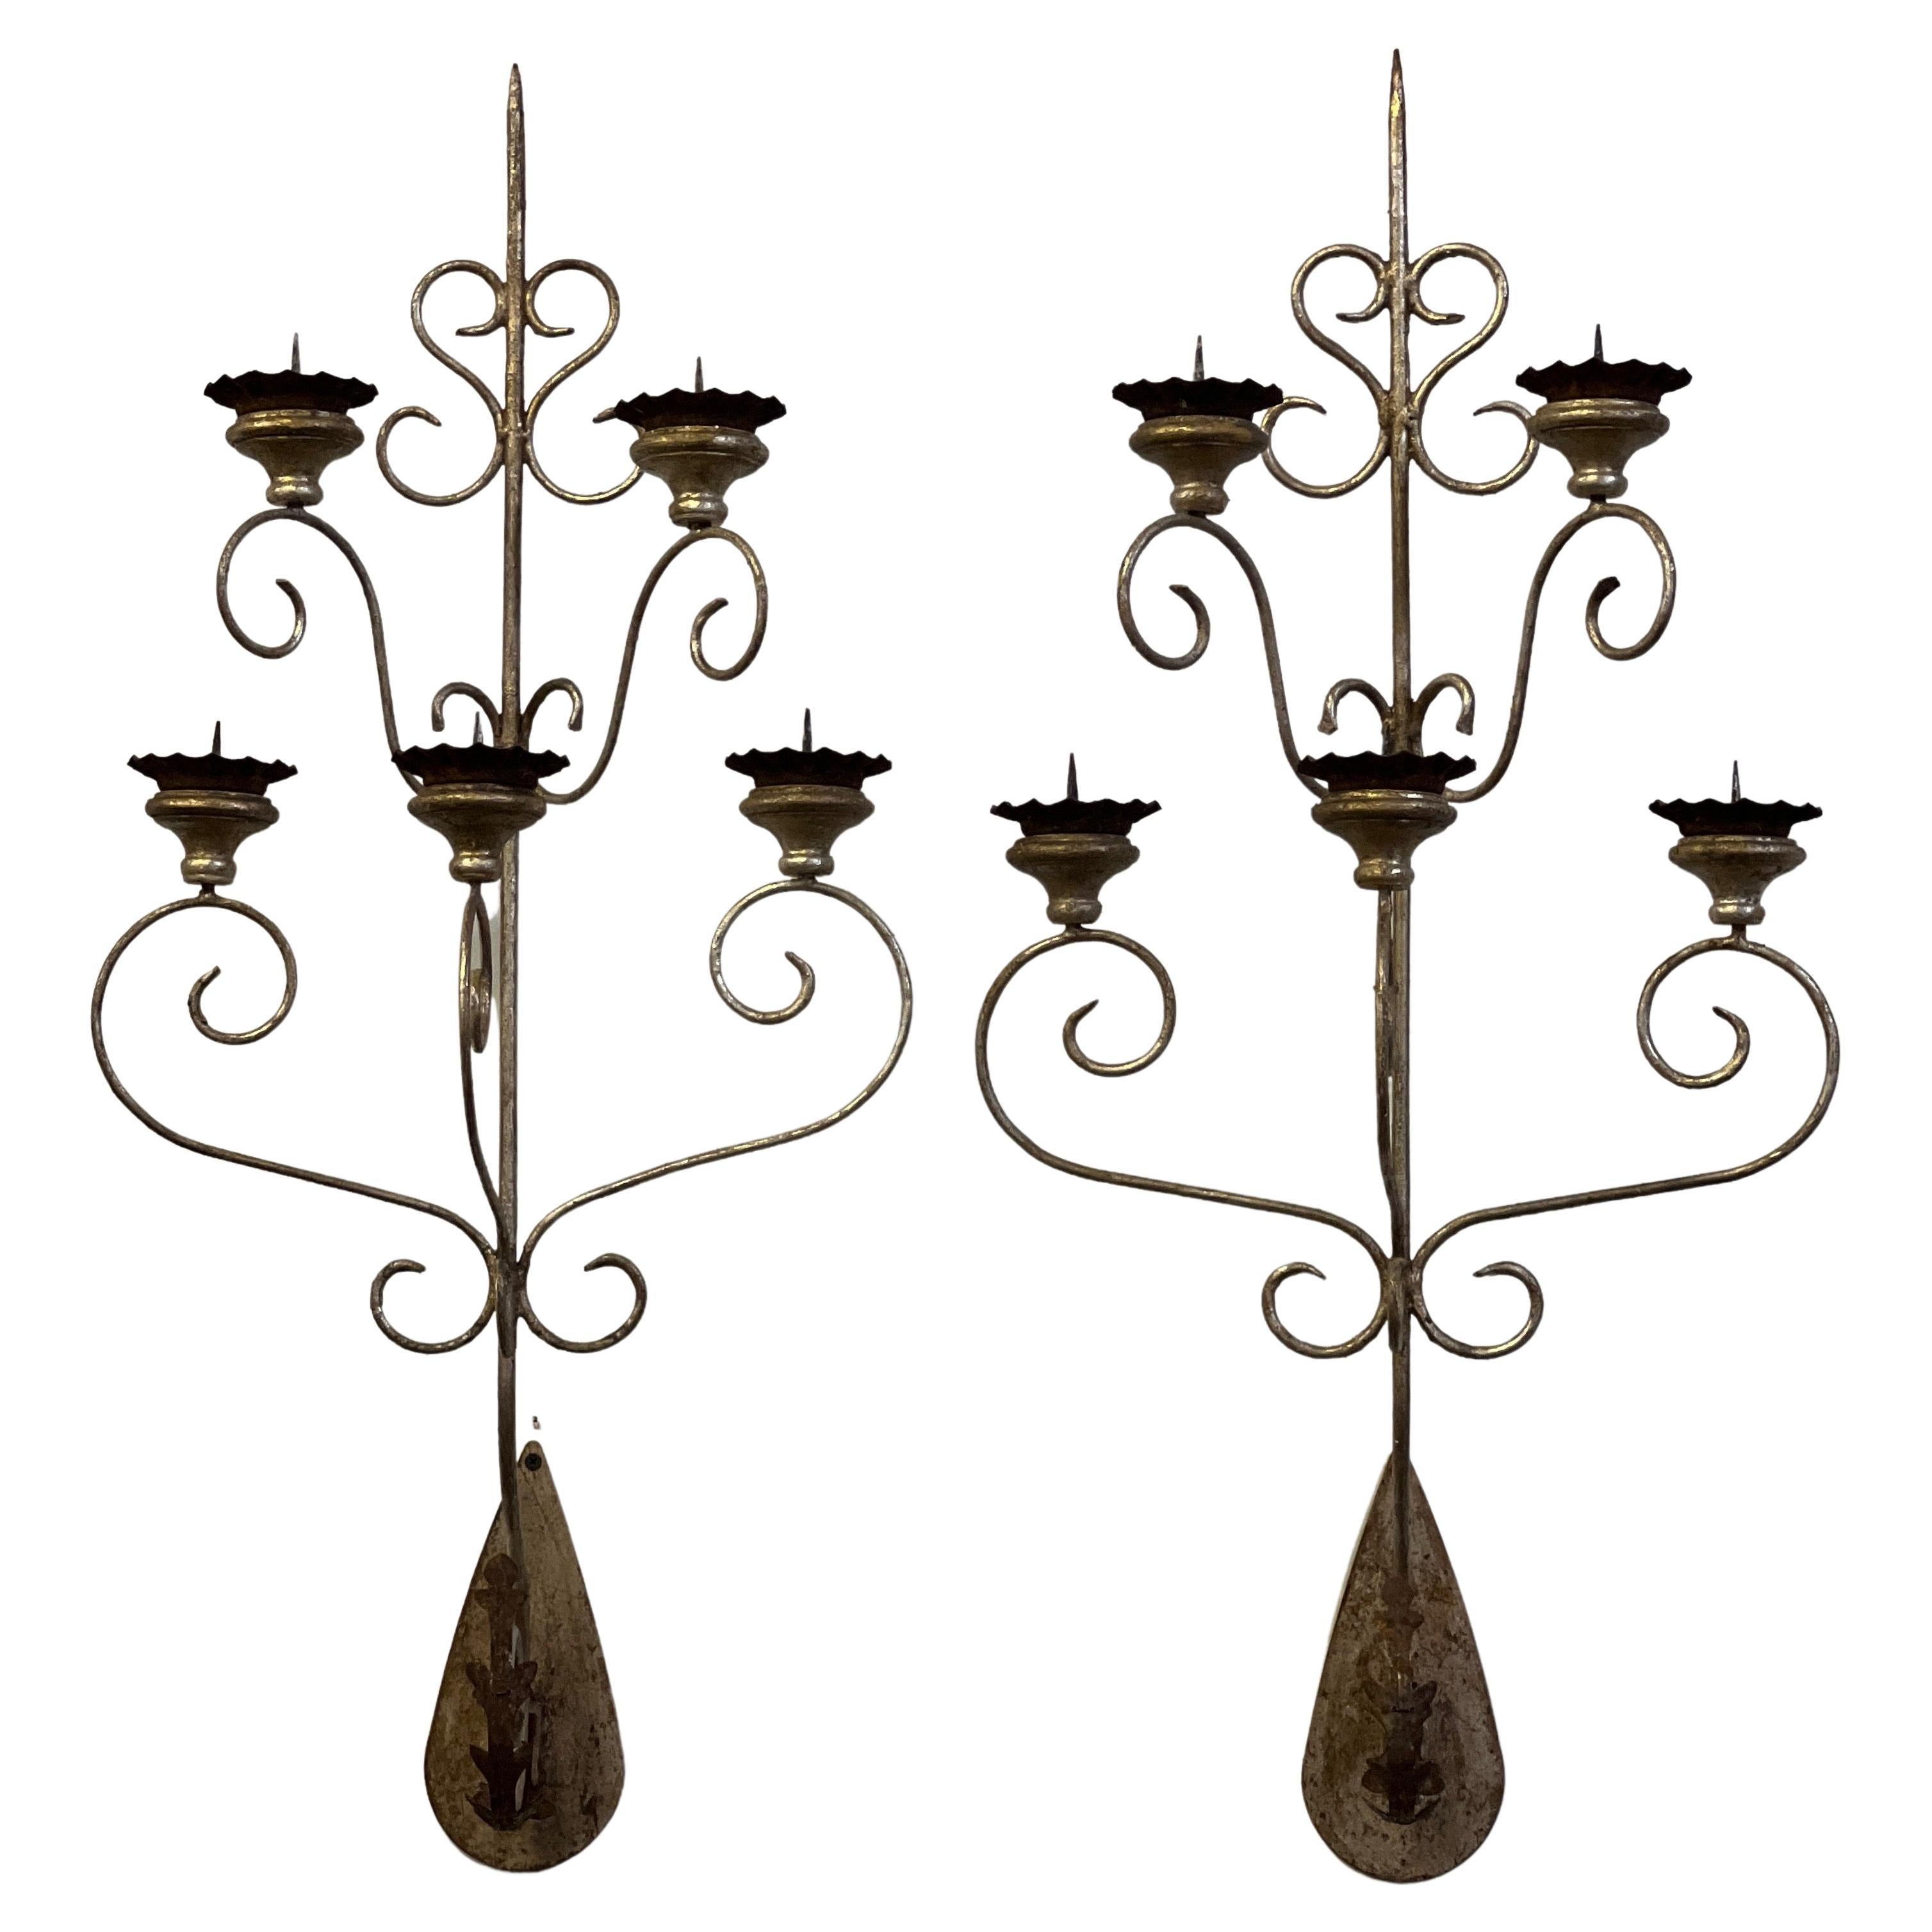 Italian Silver Gilt 5 Arm Candle Wall Sconce, Pair For Sale